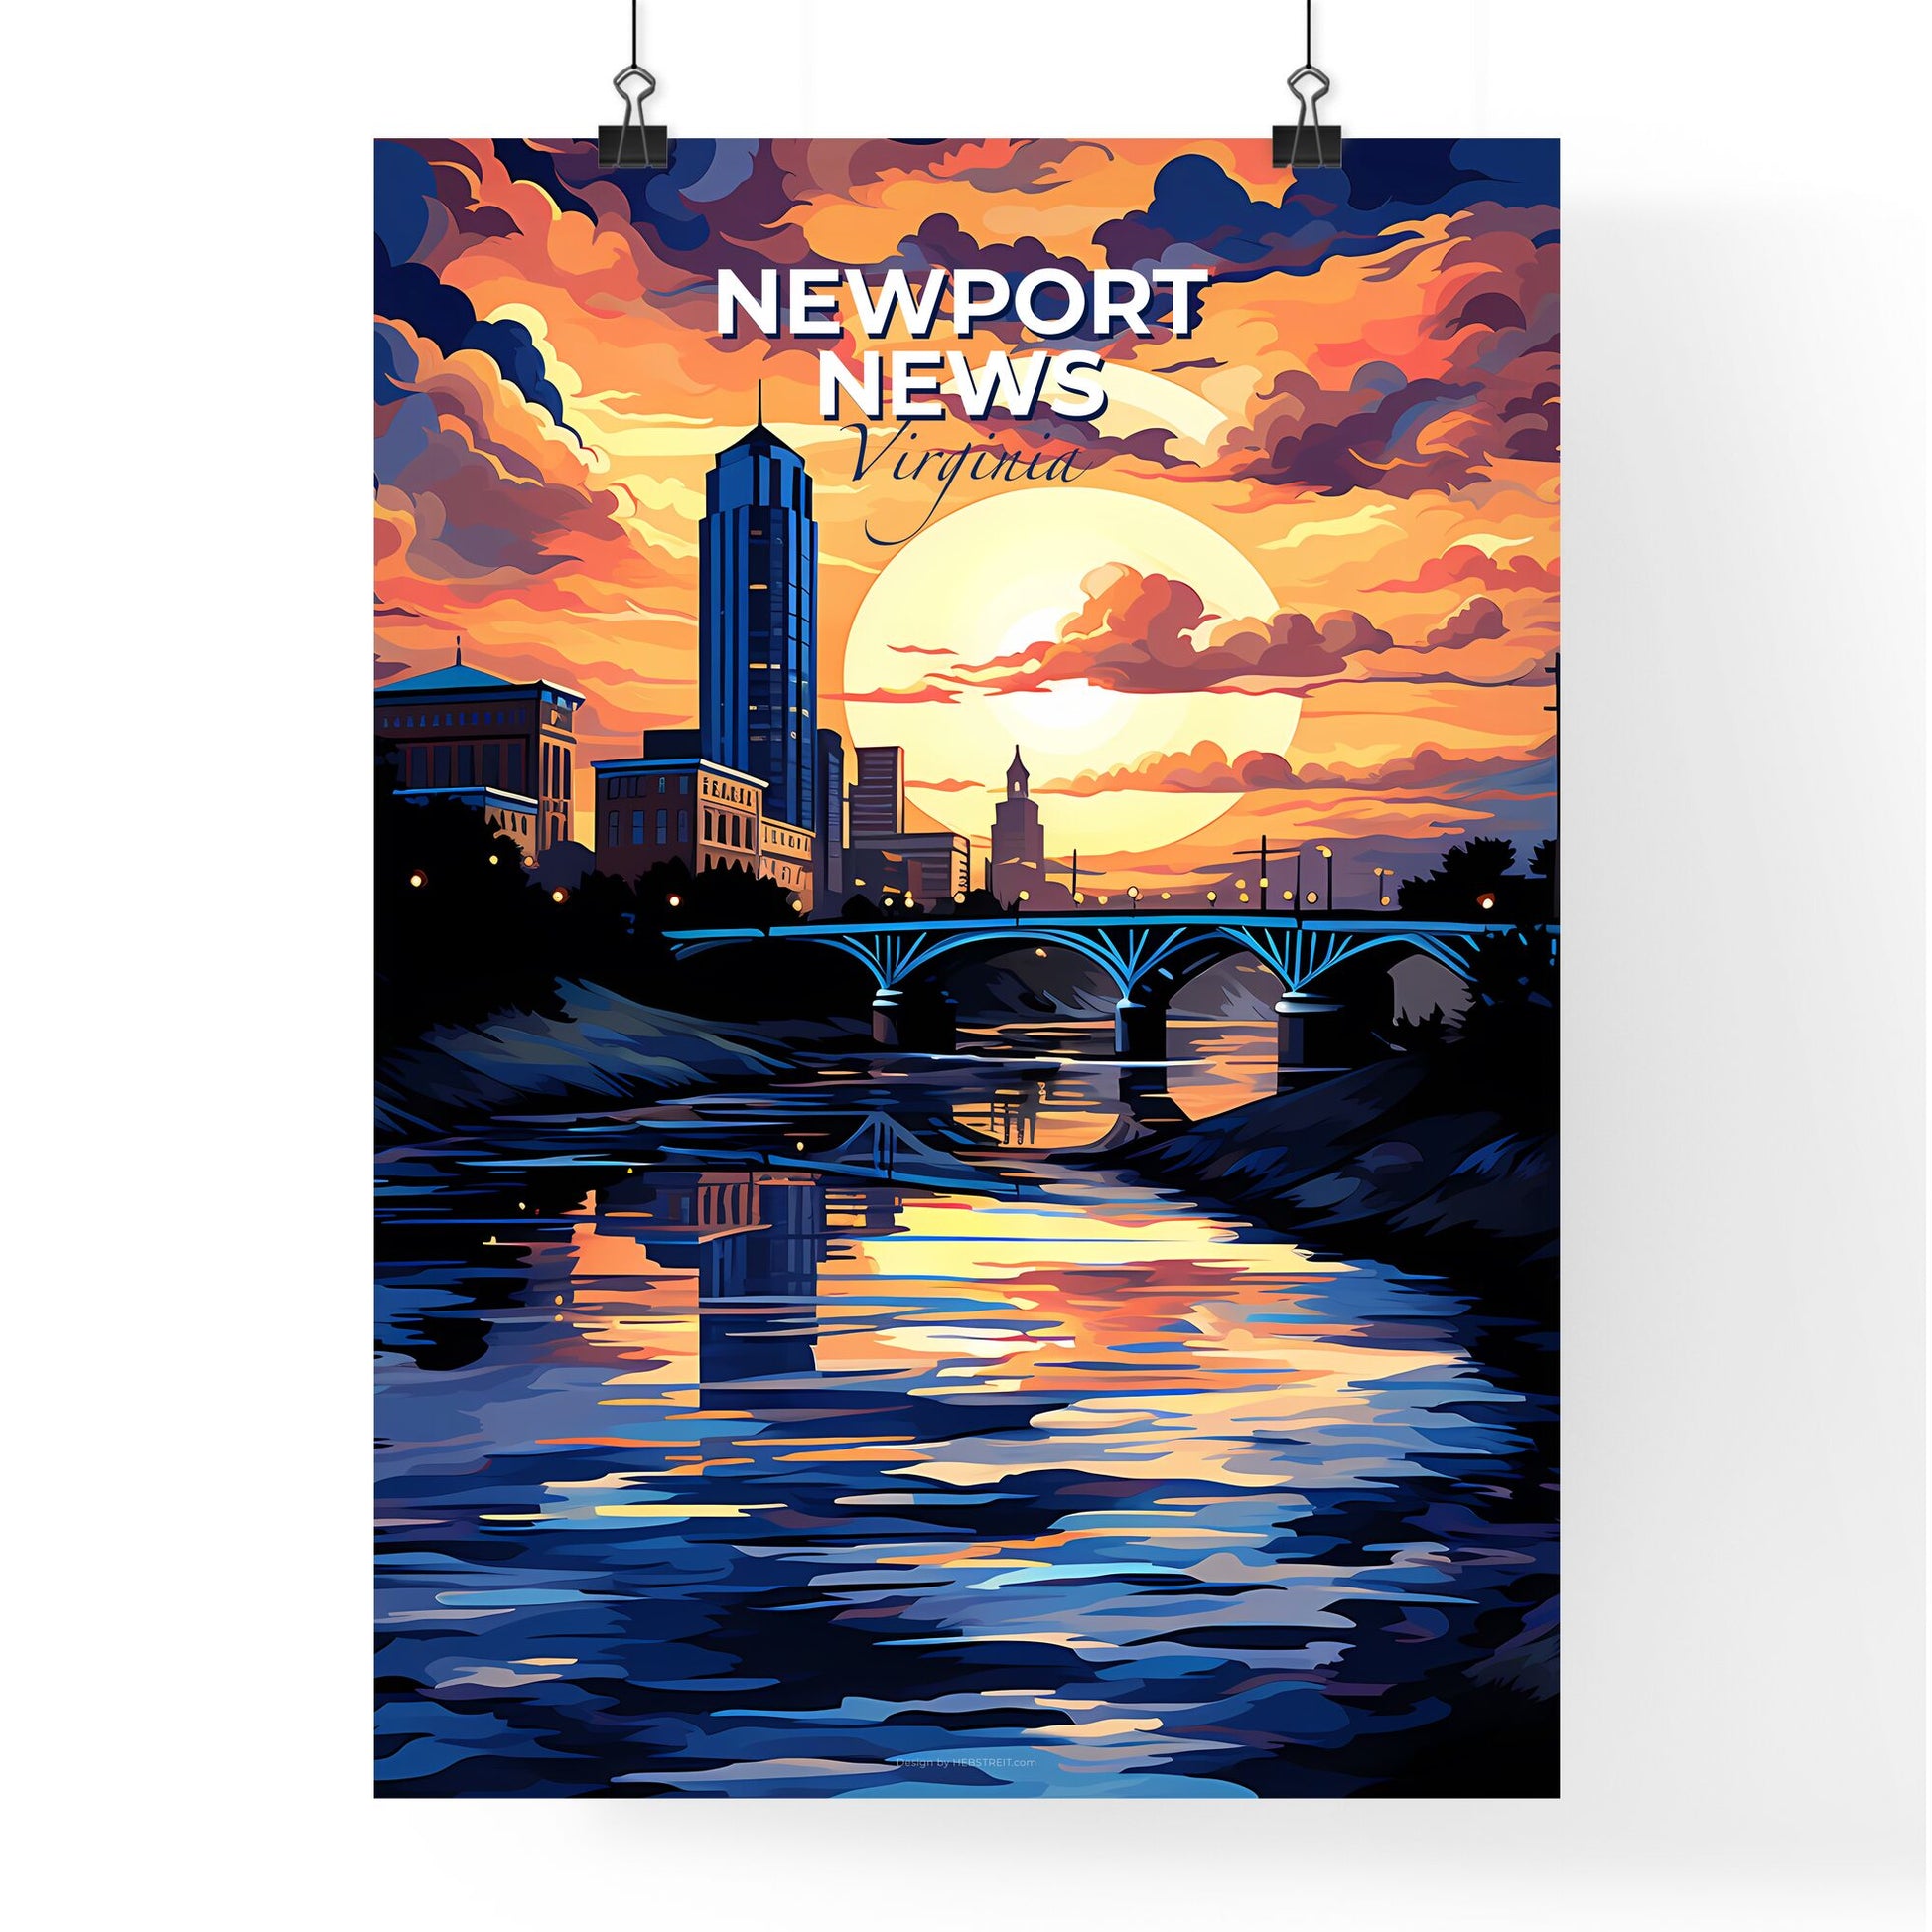 Newport News, Virginia, A Poster of a colorful sunset over a river with a bridge and a city Default Title